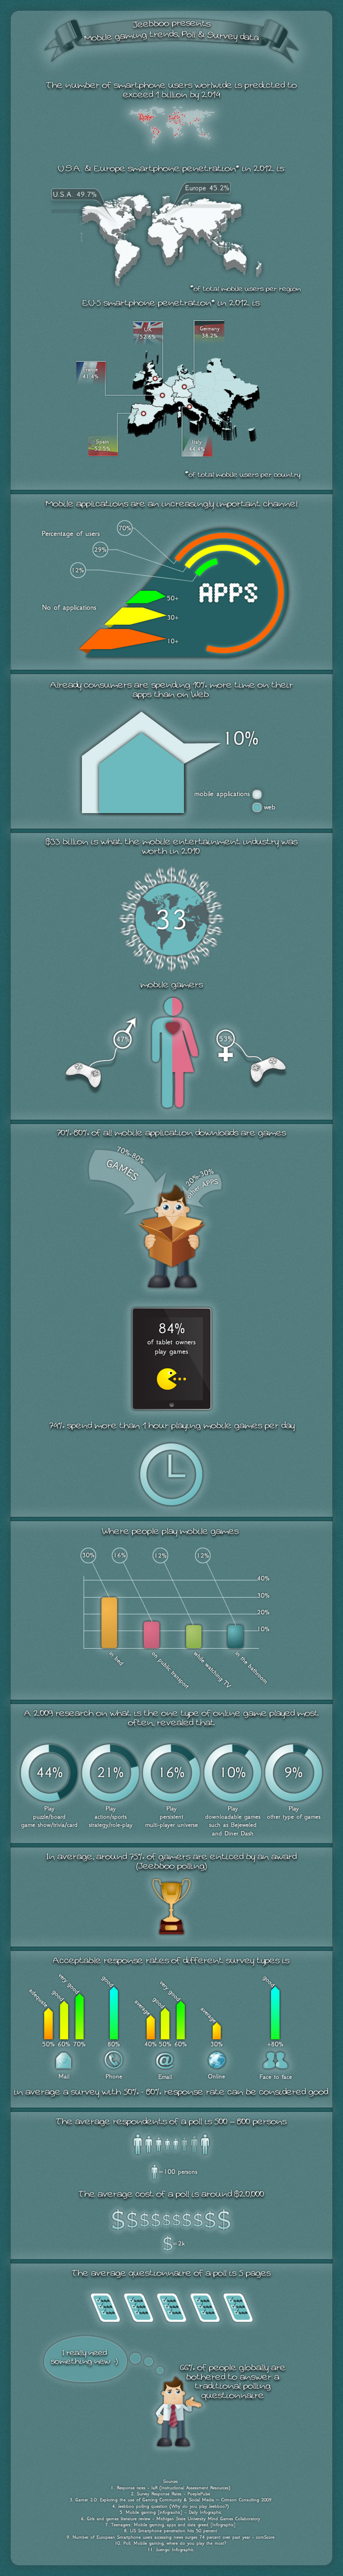 Mobile gaming trends, polling and survey data Infographic